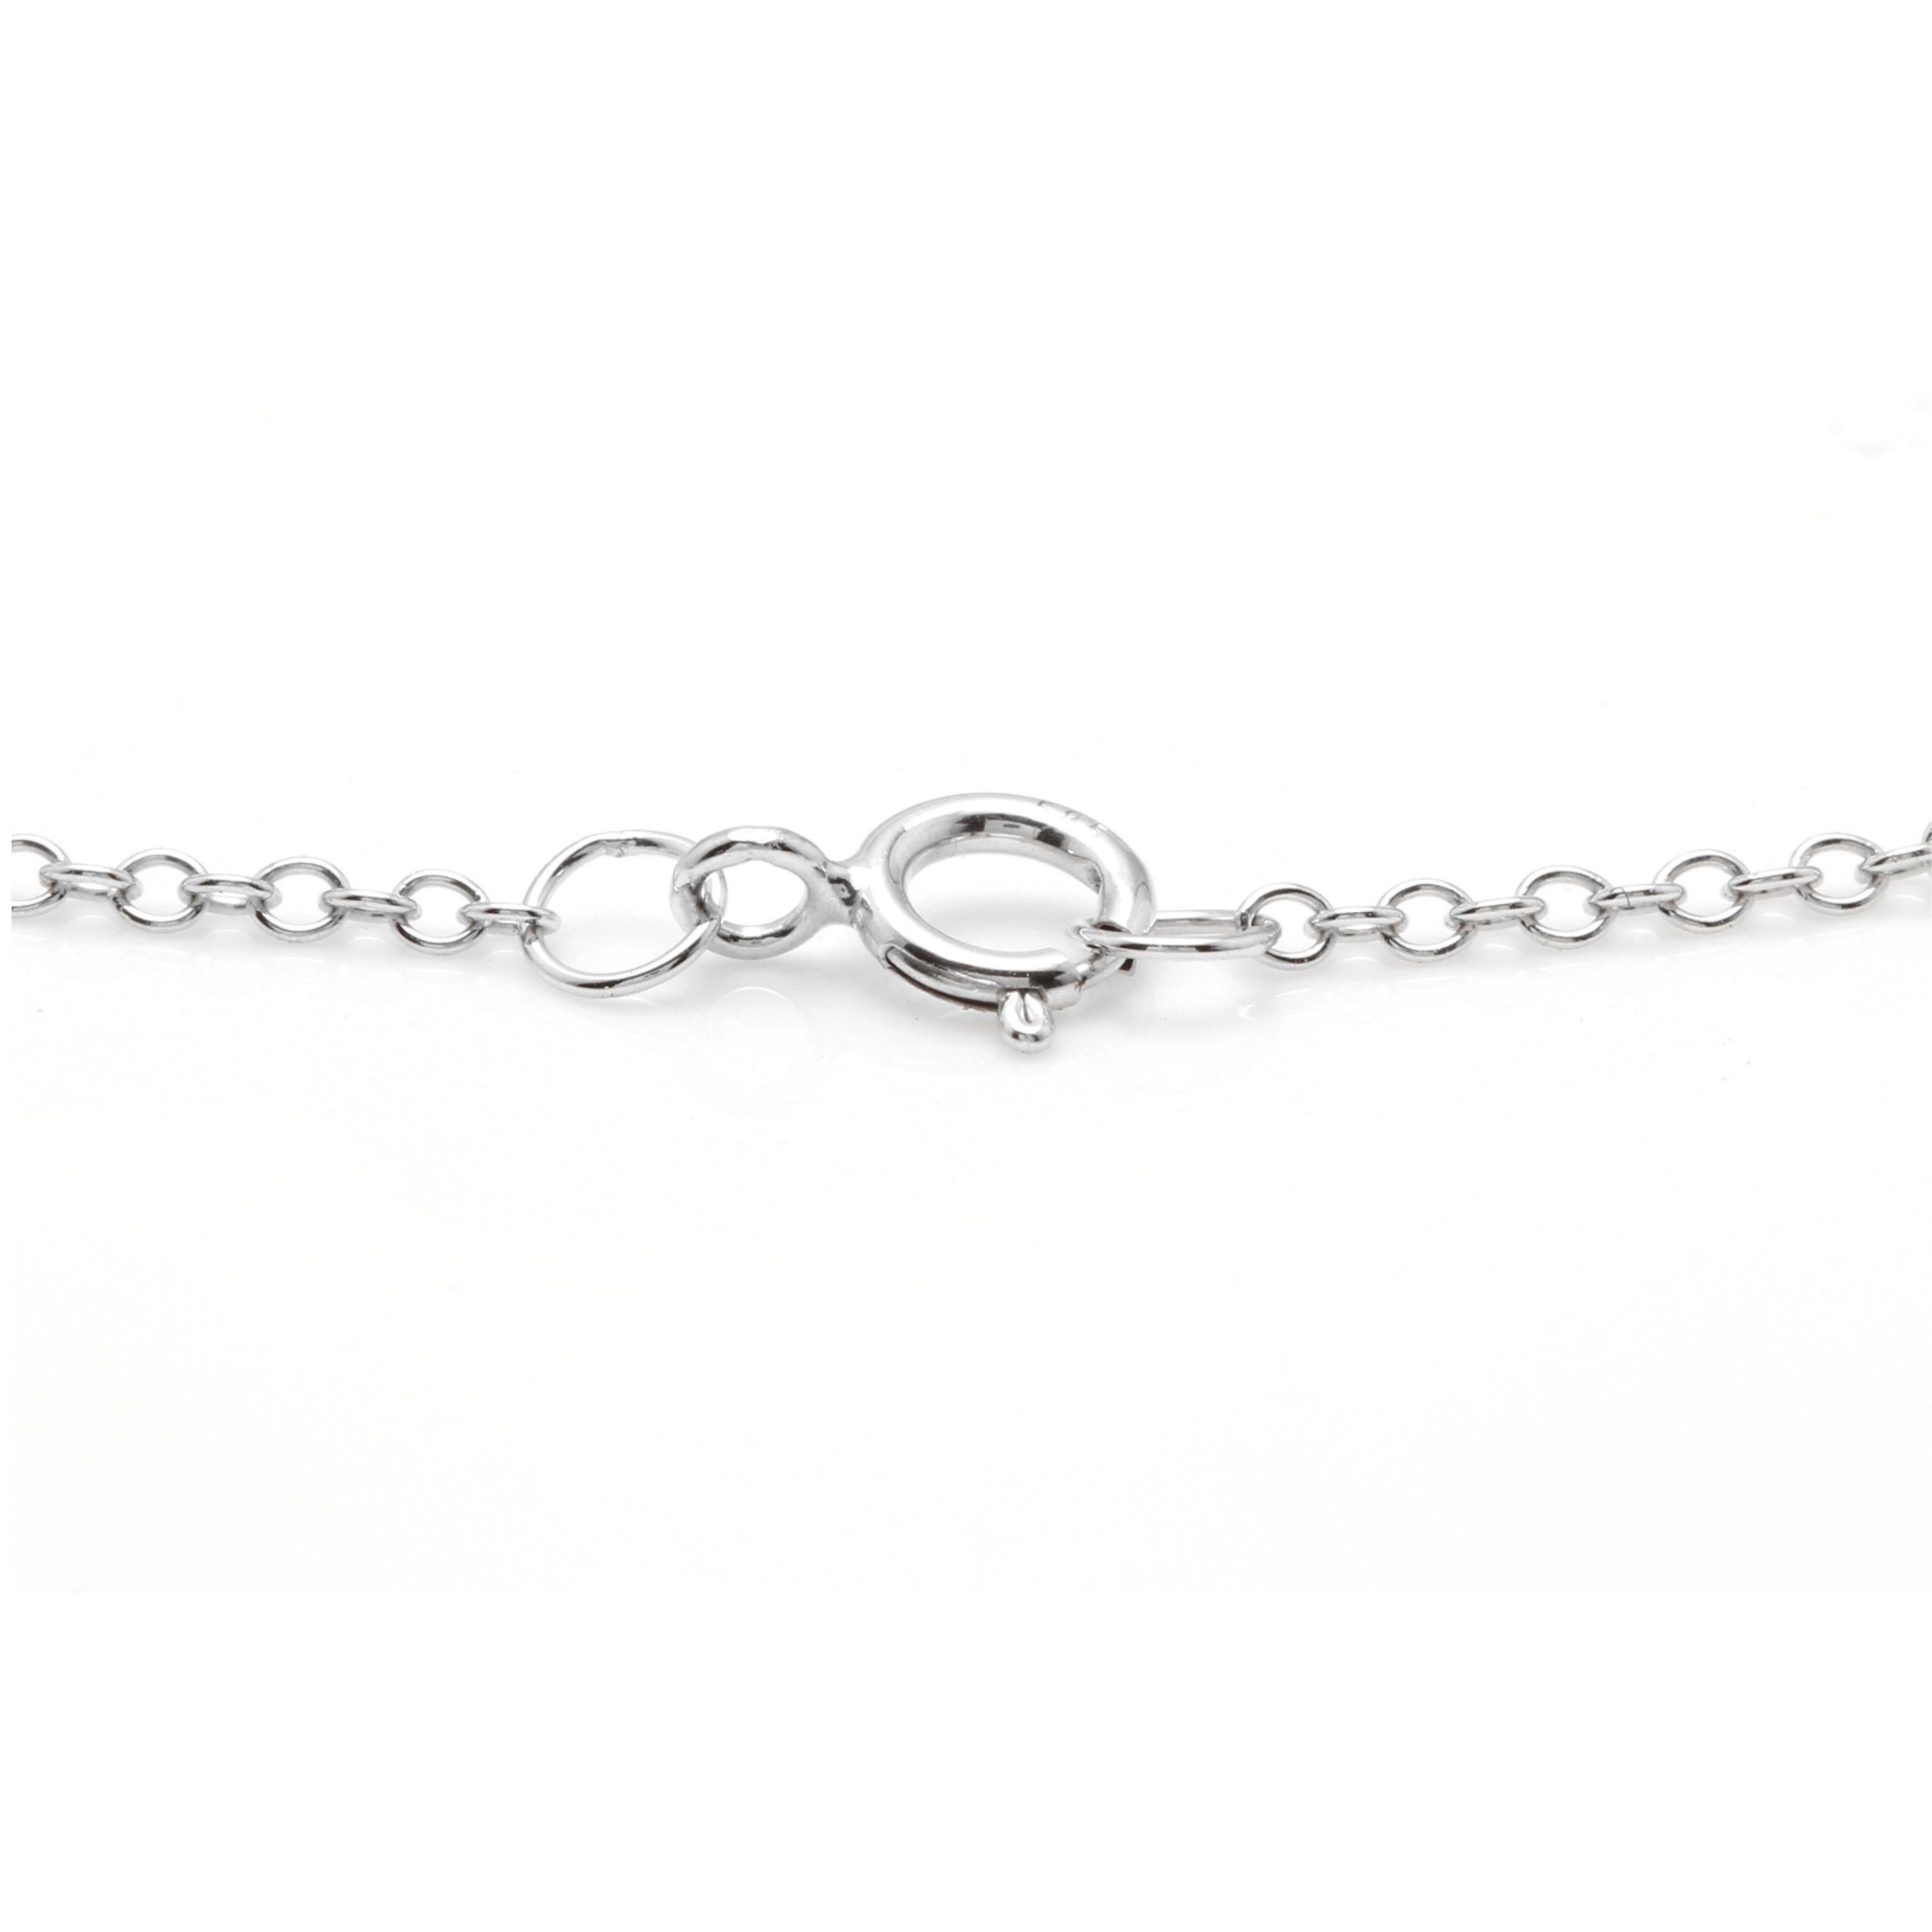 Splendid 14k Solid White Gold Chain Necklace

Amazing looking piece!

Stamped: 14k

Total Diamond Weight is: Approx. 0.30 Carats (G-H / SI1)

Chain Length is: 16 inches

Total item weight is: 2.9 grams

Disclaimer: all weights, measurements and